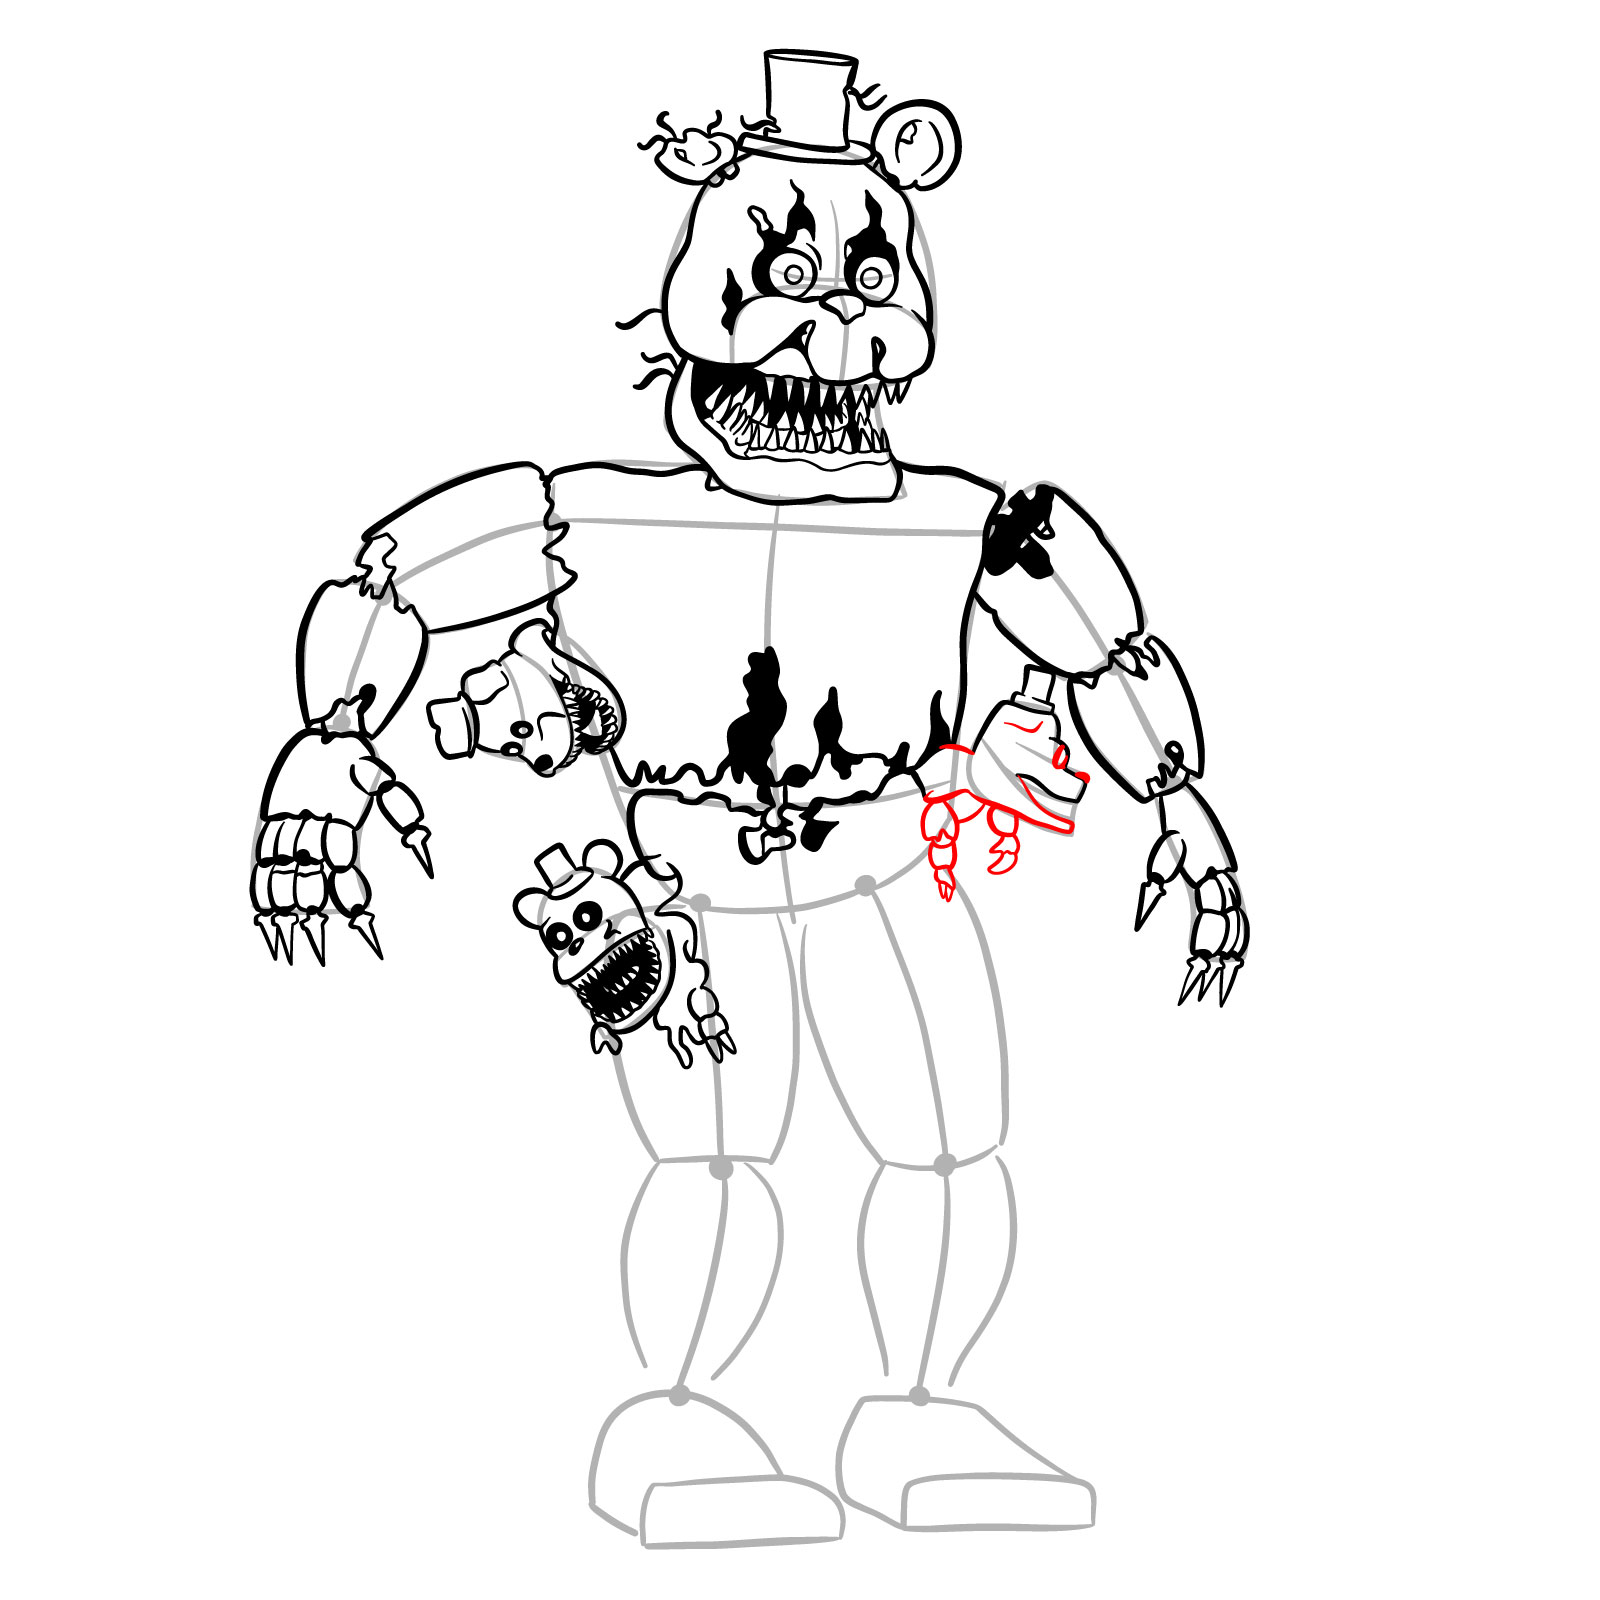 How to draw Nightmare Freddy - step 37